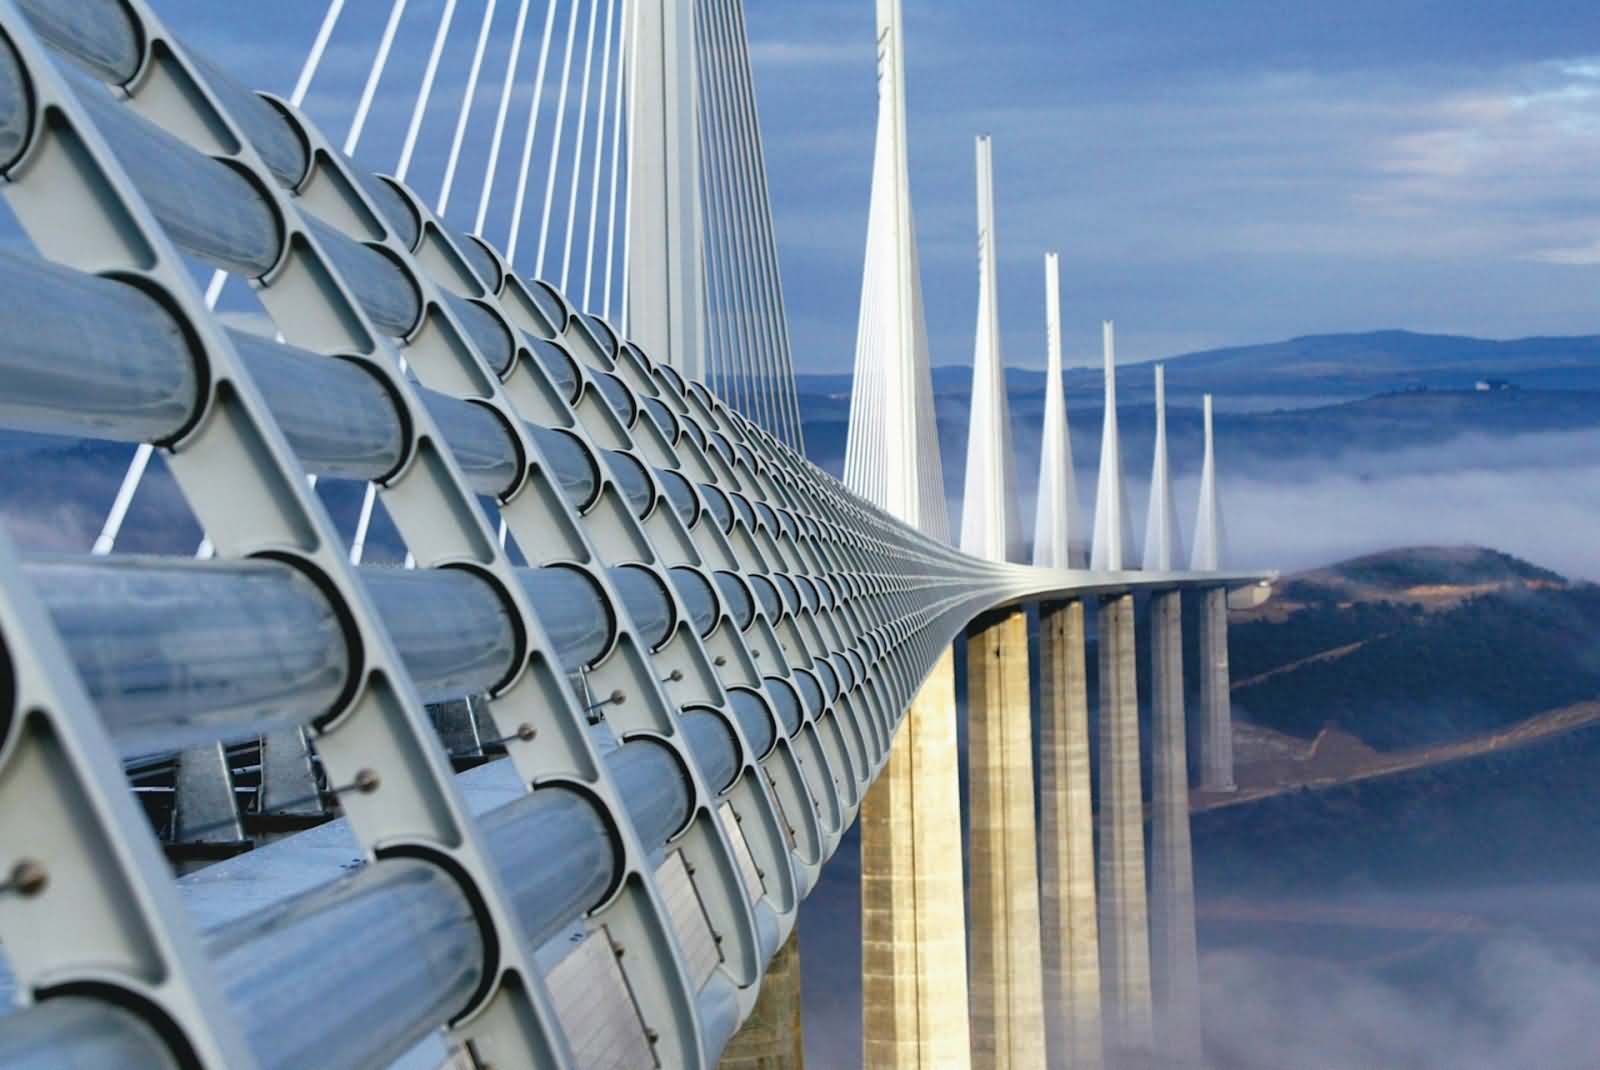 Details of Cables of Millau Viaduct